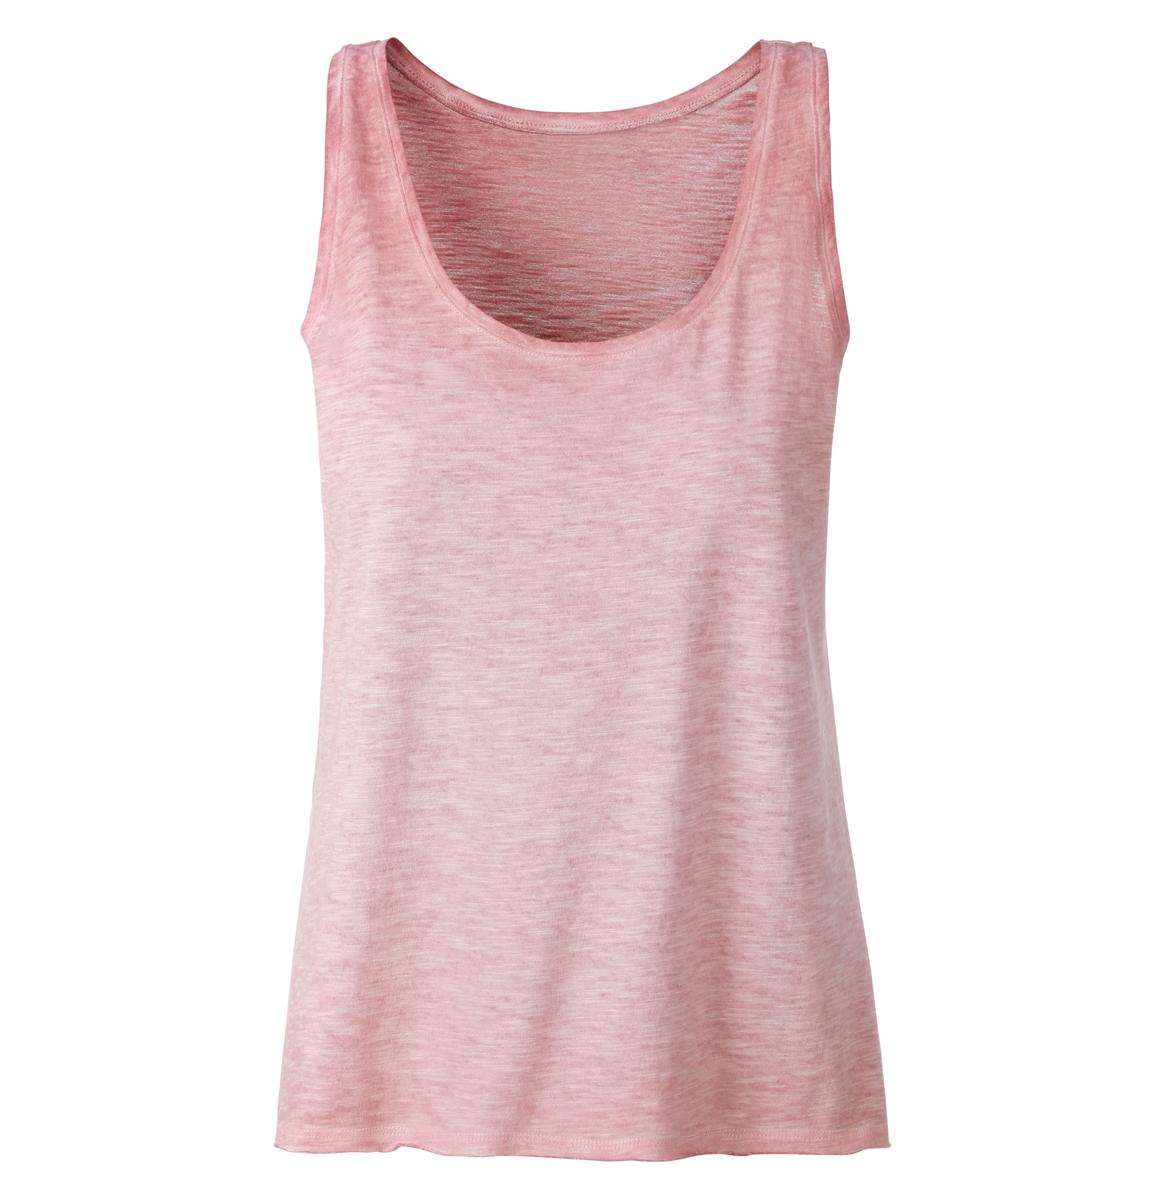 8017 softpink front | Get this image